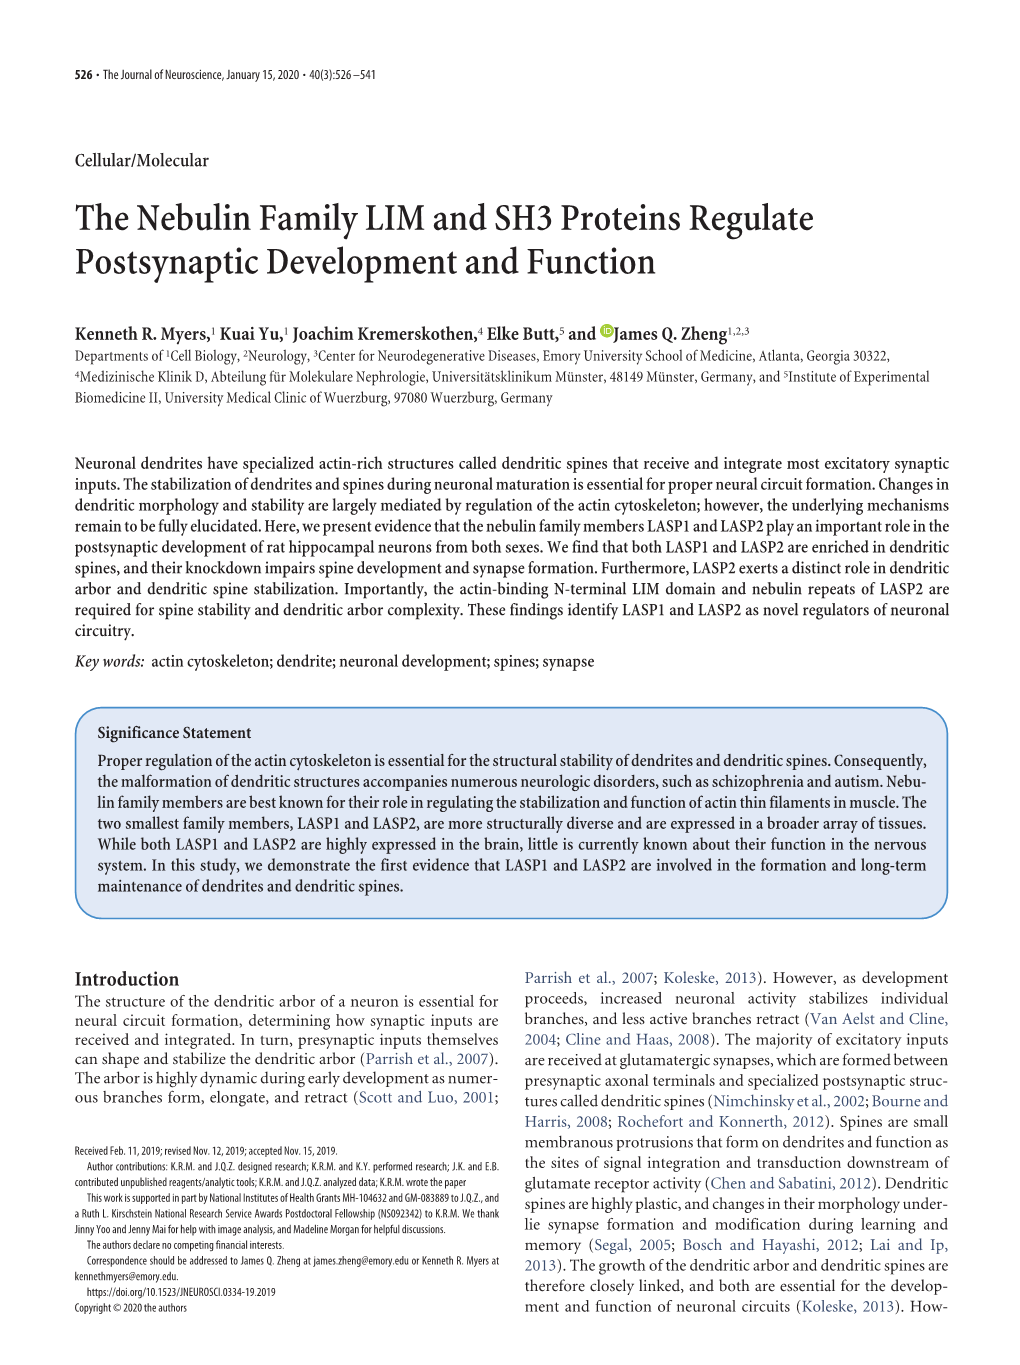 The Nebulin Family LIM and SH3 Proteins Regulate Postsynaptic Development and Function